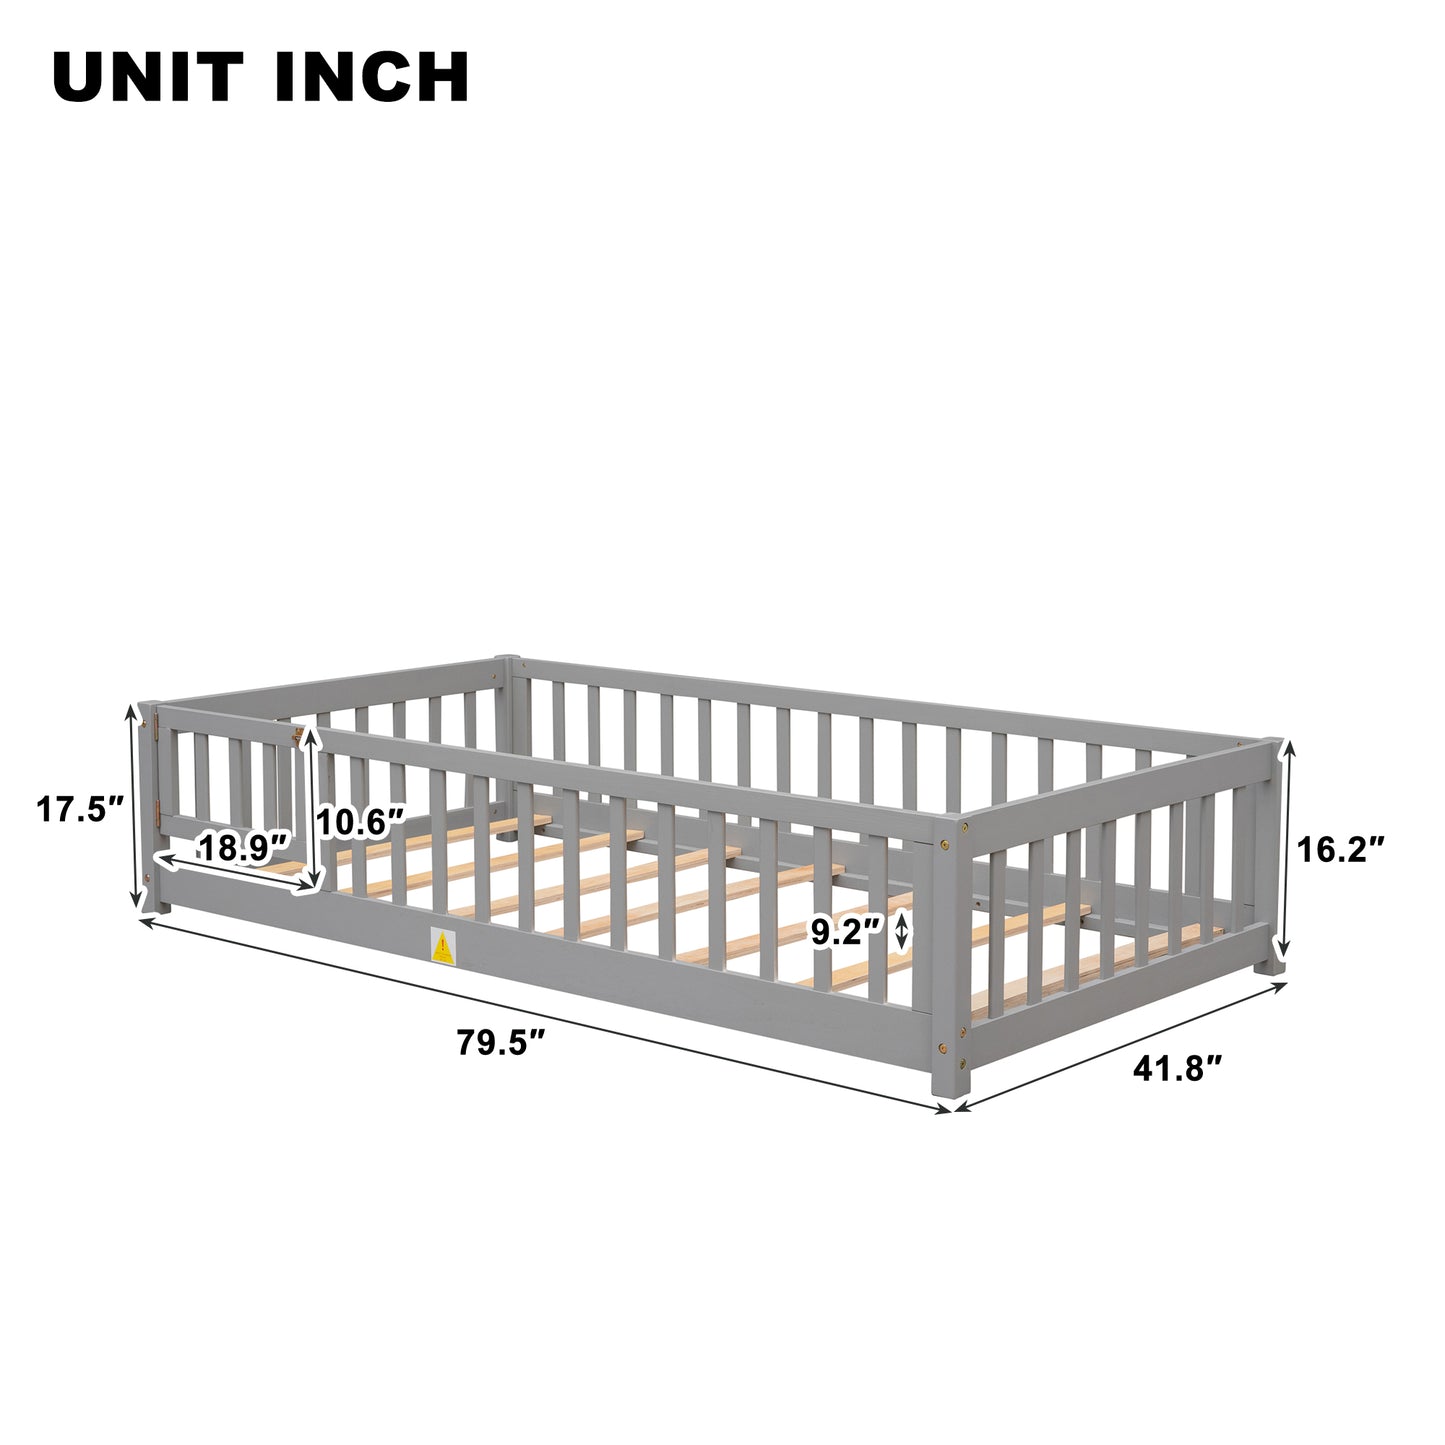 HSUNNS Twin Size Daybed Frame for Toddlers Kids, Twin Floor Bed with Fence Rails and Closable Door, Twin Size Platform Bed Playhouse Bed for Boys Girls, No Box Spring Needed, Easy Assembly, Gray